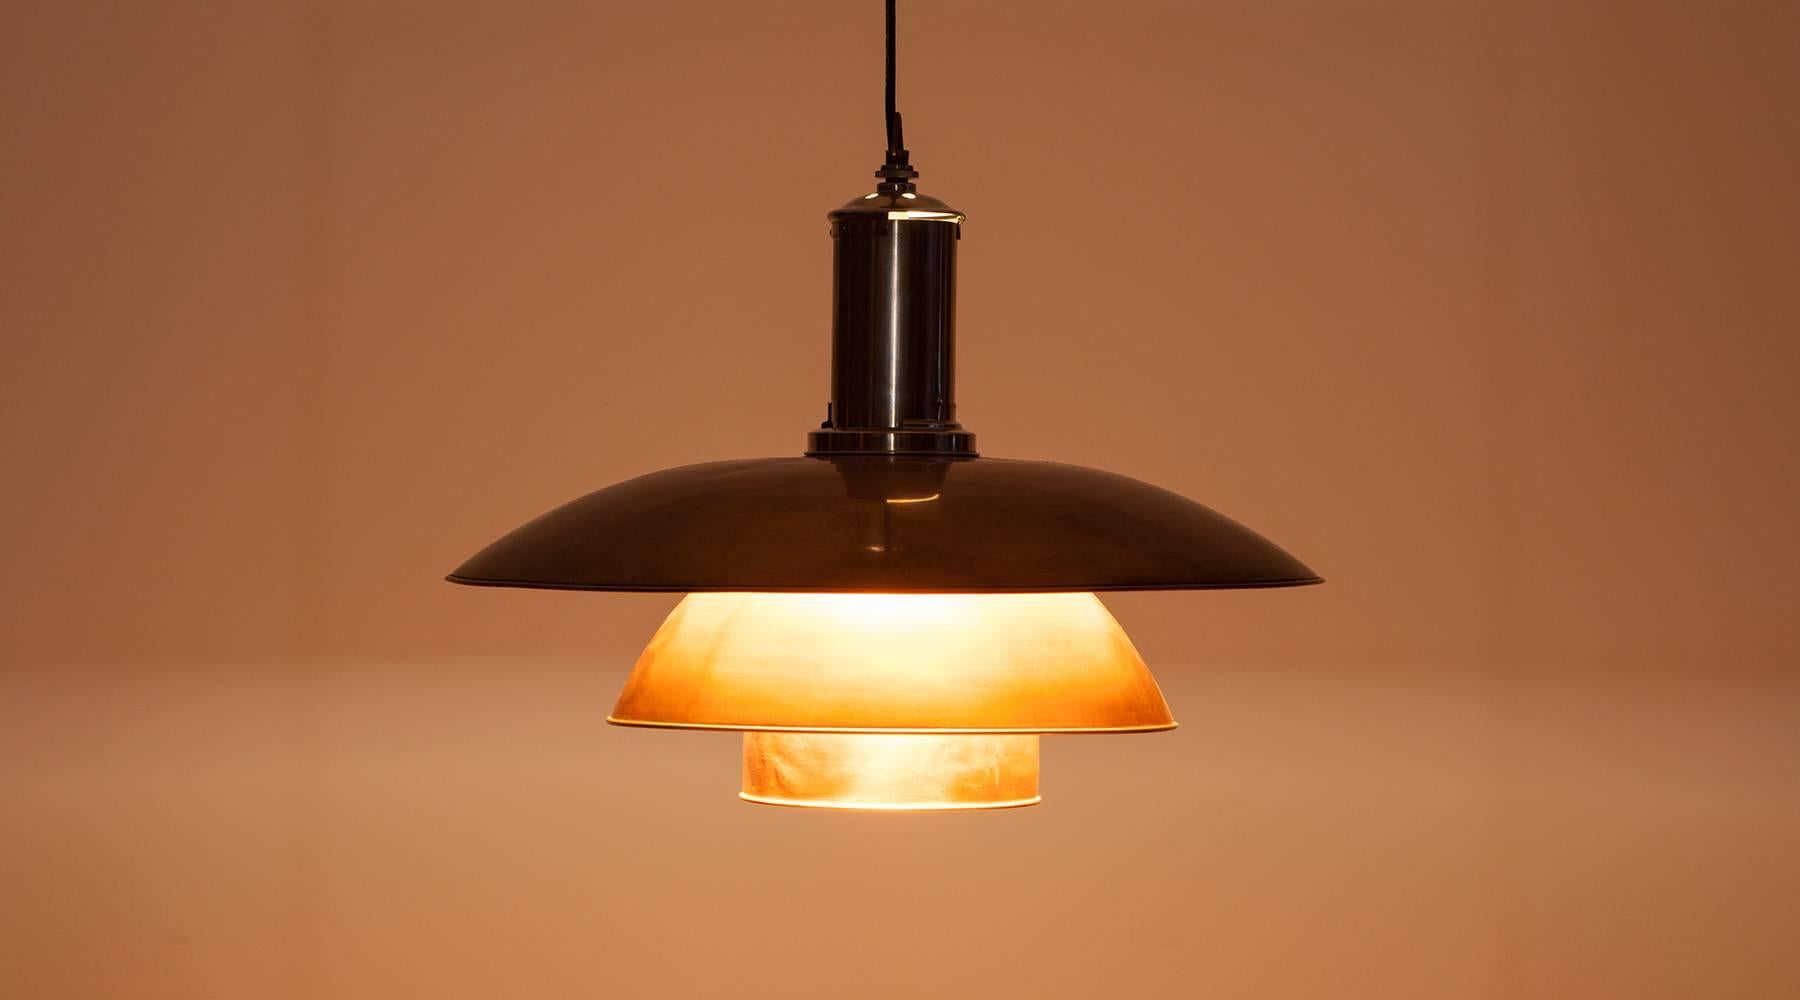 Very rare Ceiling Lamp of Poul Henningsen pendants with copper shades, a nickel-plated fitment and a glass shade just in front of the bulb for a soft, warm light. Designed by Poul Henningsen in the 1940s. The Lamp is in good conditions and has a